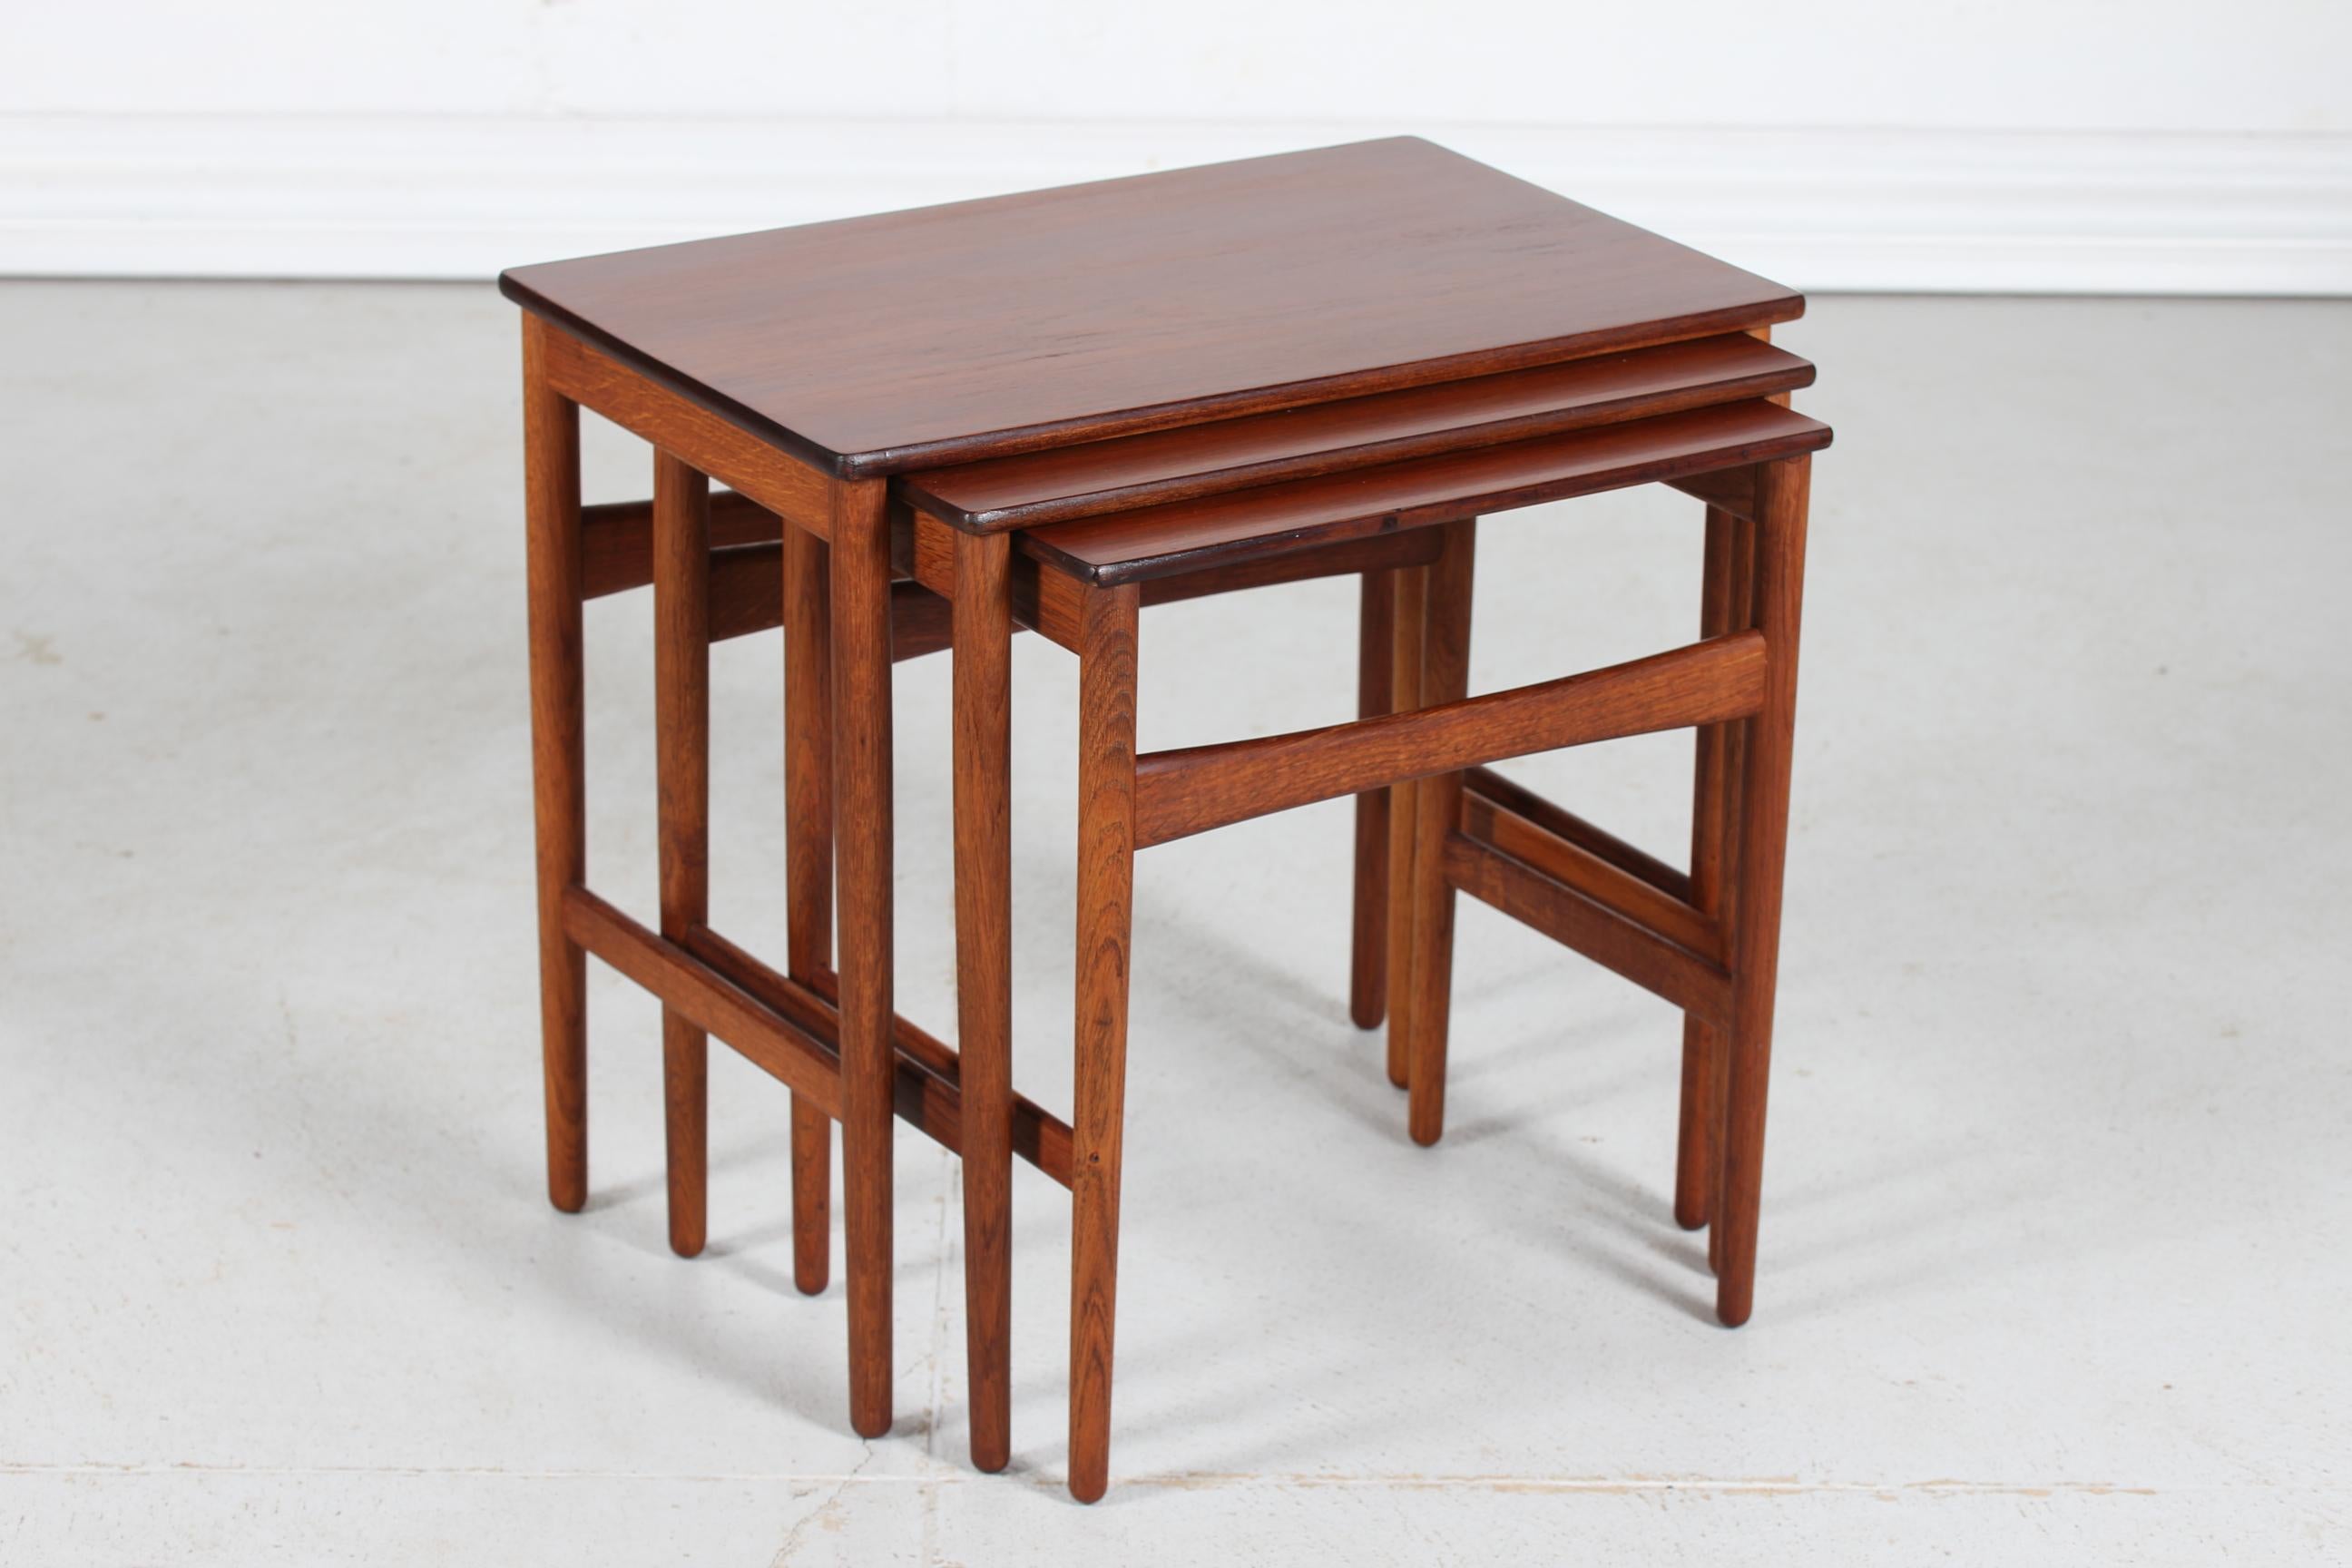 Danish vintage Hans Wegner (1914-2007) nesting tables model AT 40
The three tables are made of solid oak with table tops of solid teak

The nesting tables are manufactured by Andreas Tuck and remains in good vintage condition. 
Measures is of